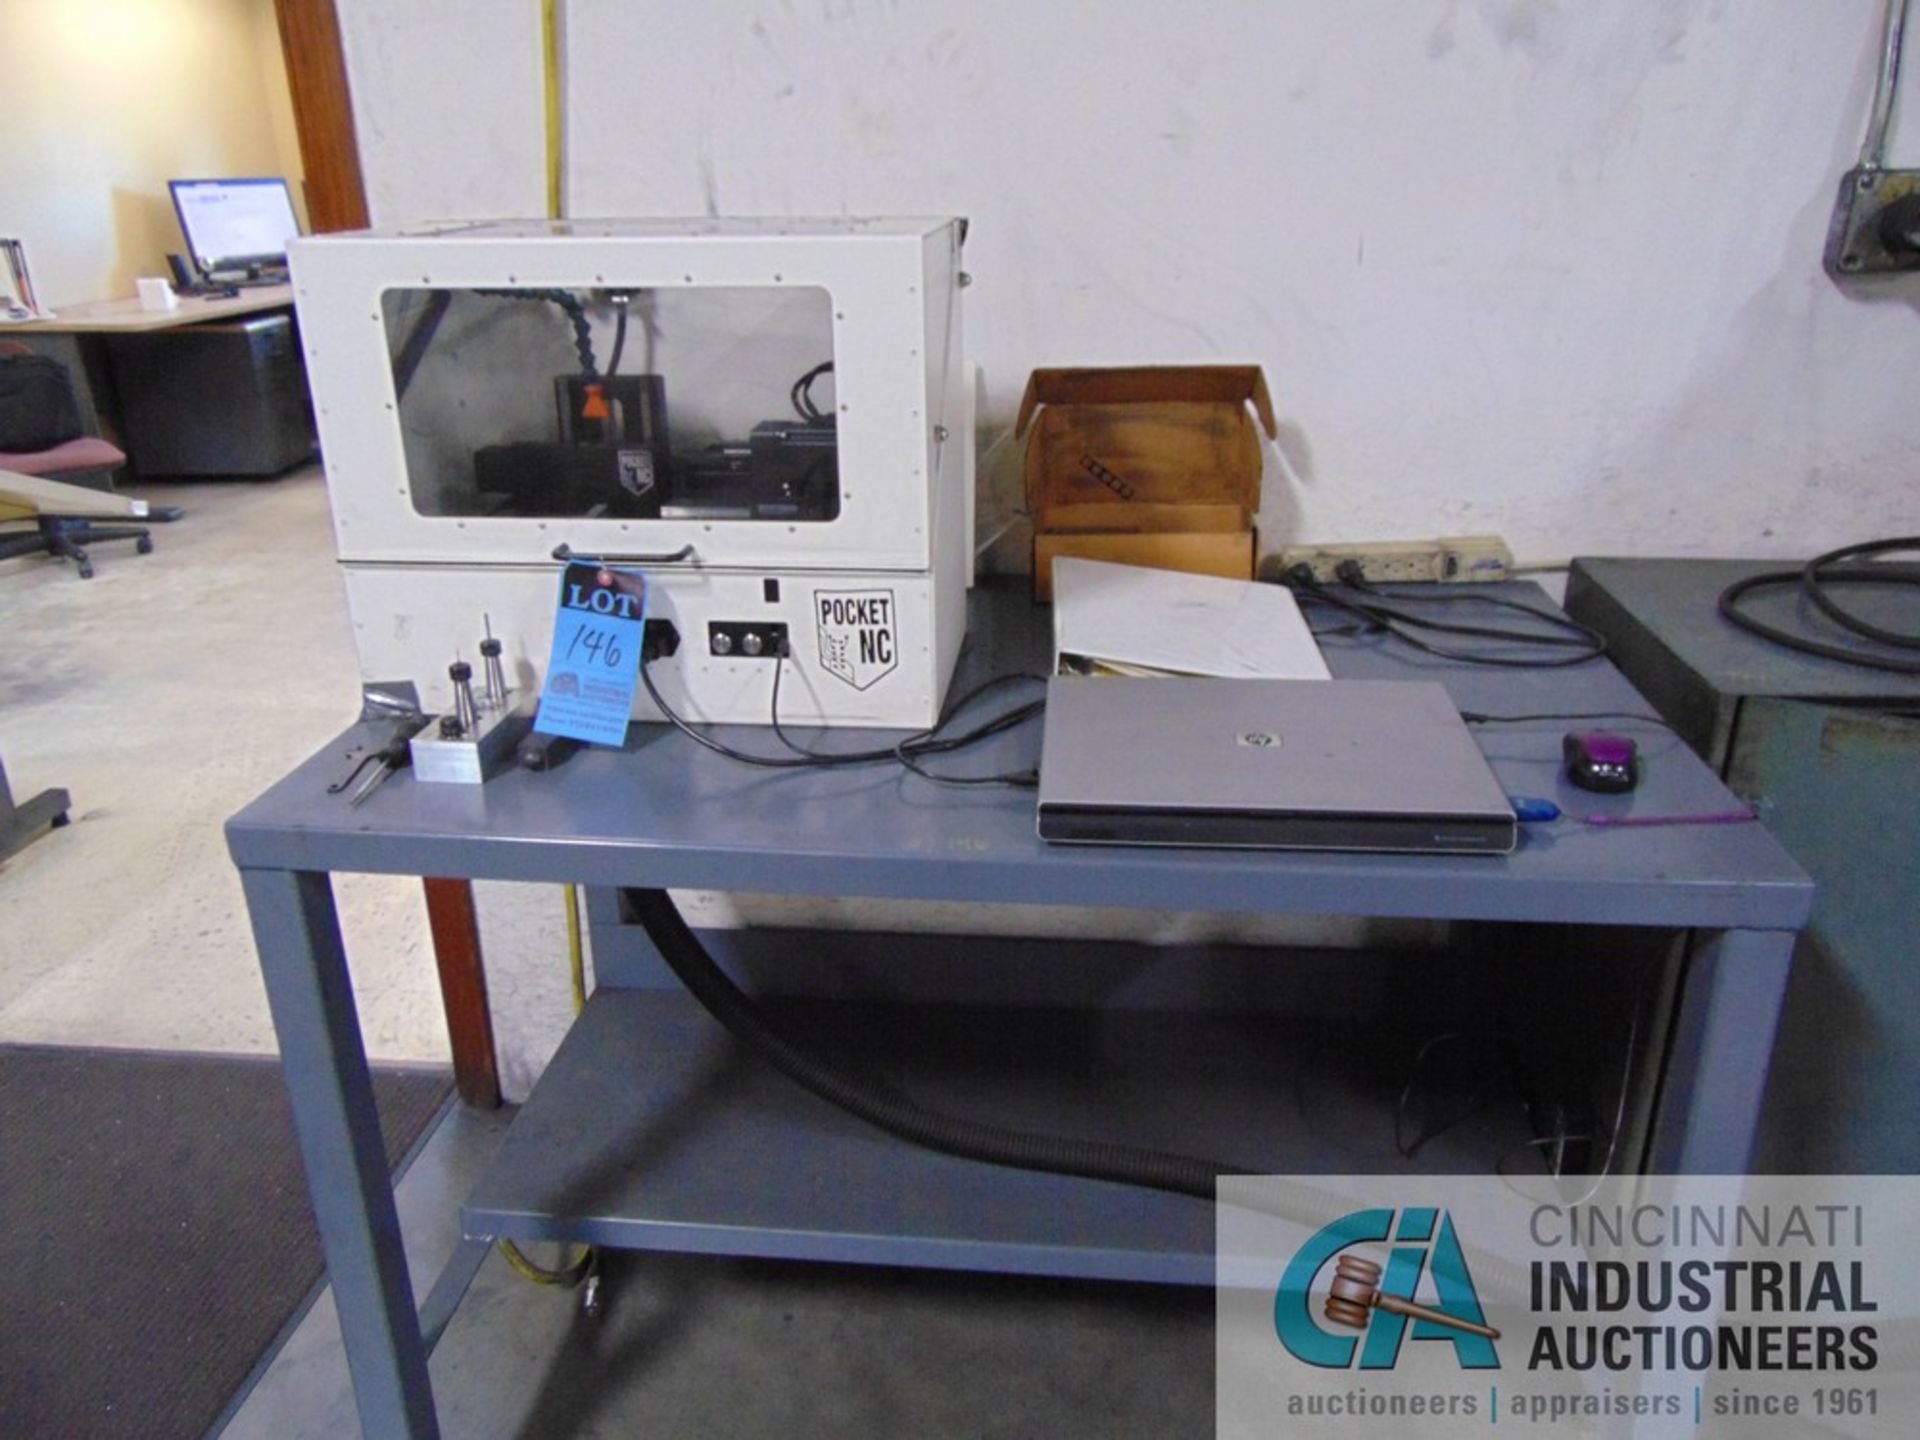 POCKET NC FIVE-AXIS CNC TABLE TOP HORIZONTAL MILL W/ LAPTOP & DCE UMA72G1 DUST COLLECTOR